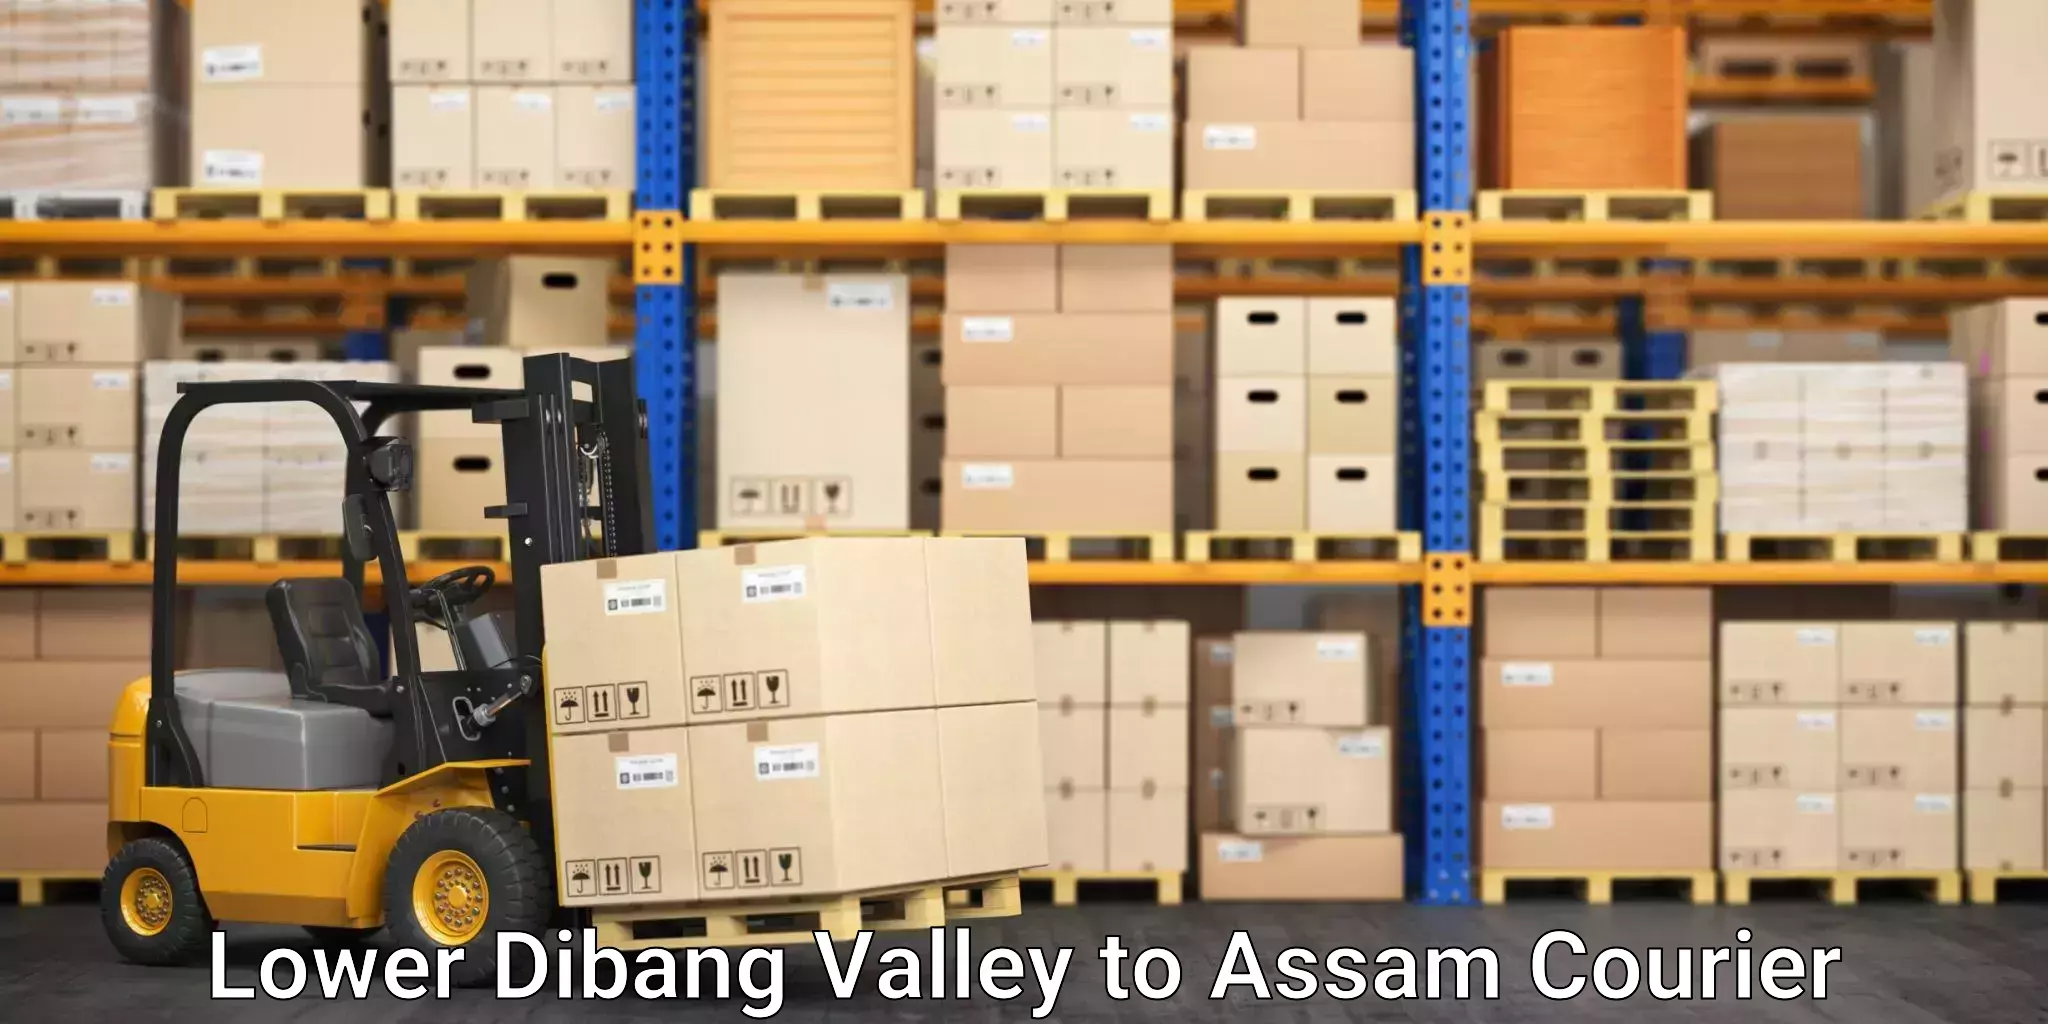 Reliable parcel services Lower Dibang Valley to Hailakandi